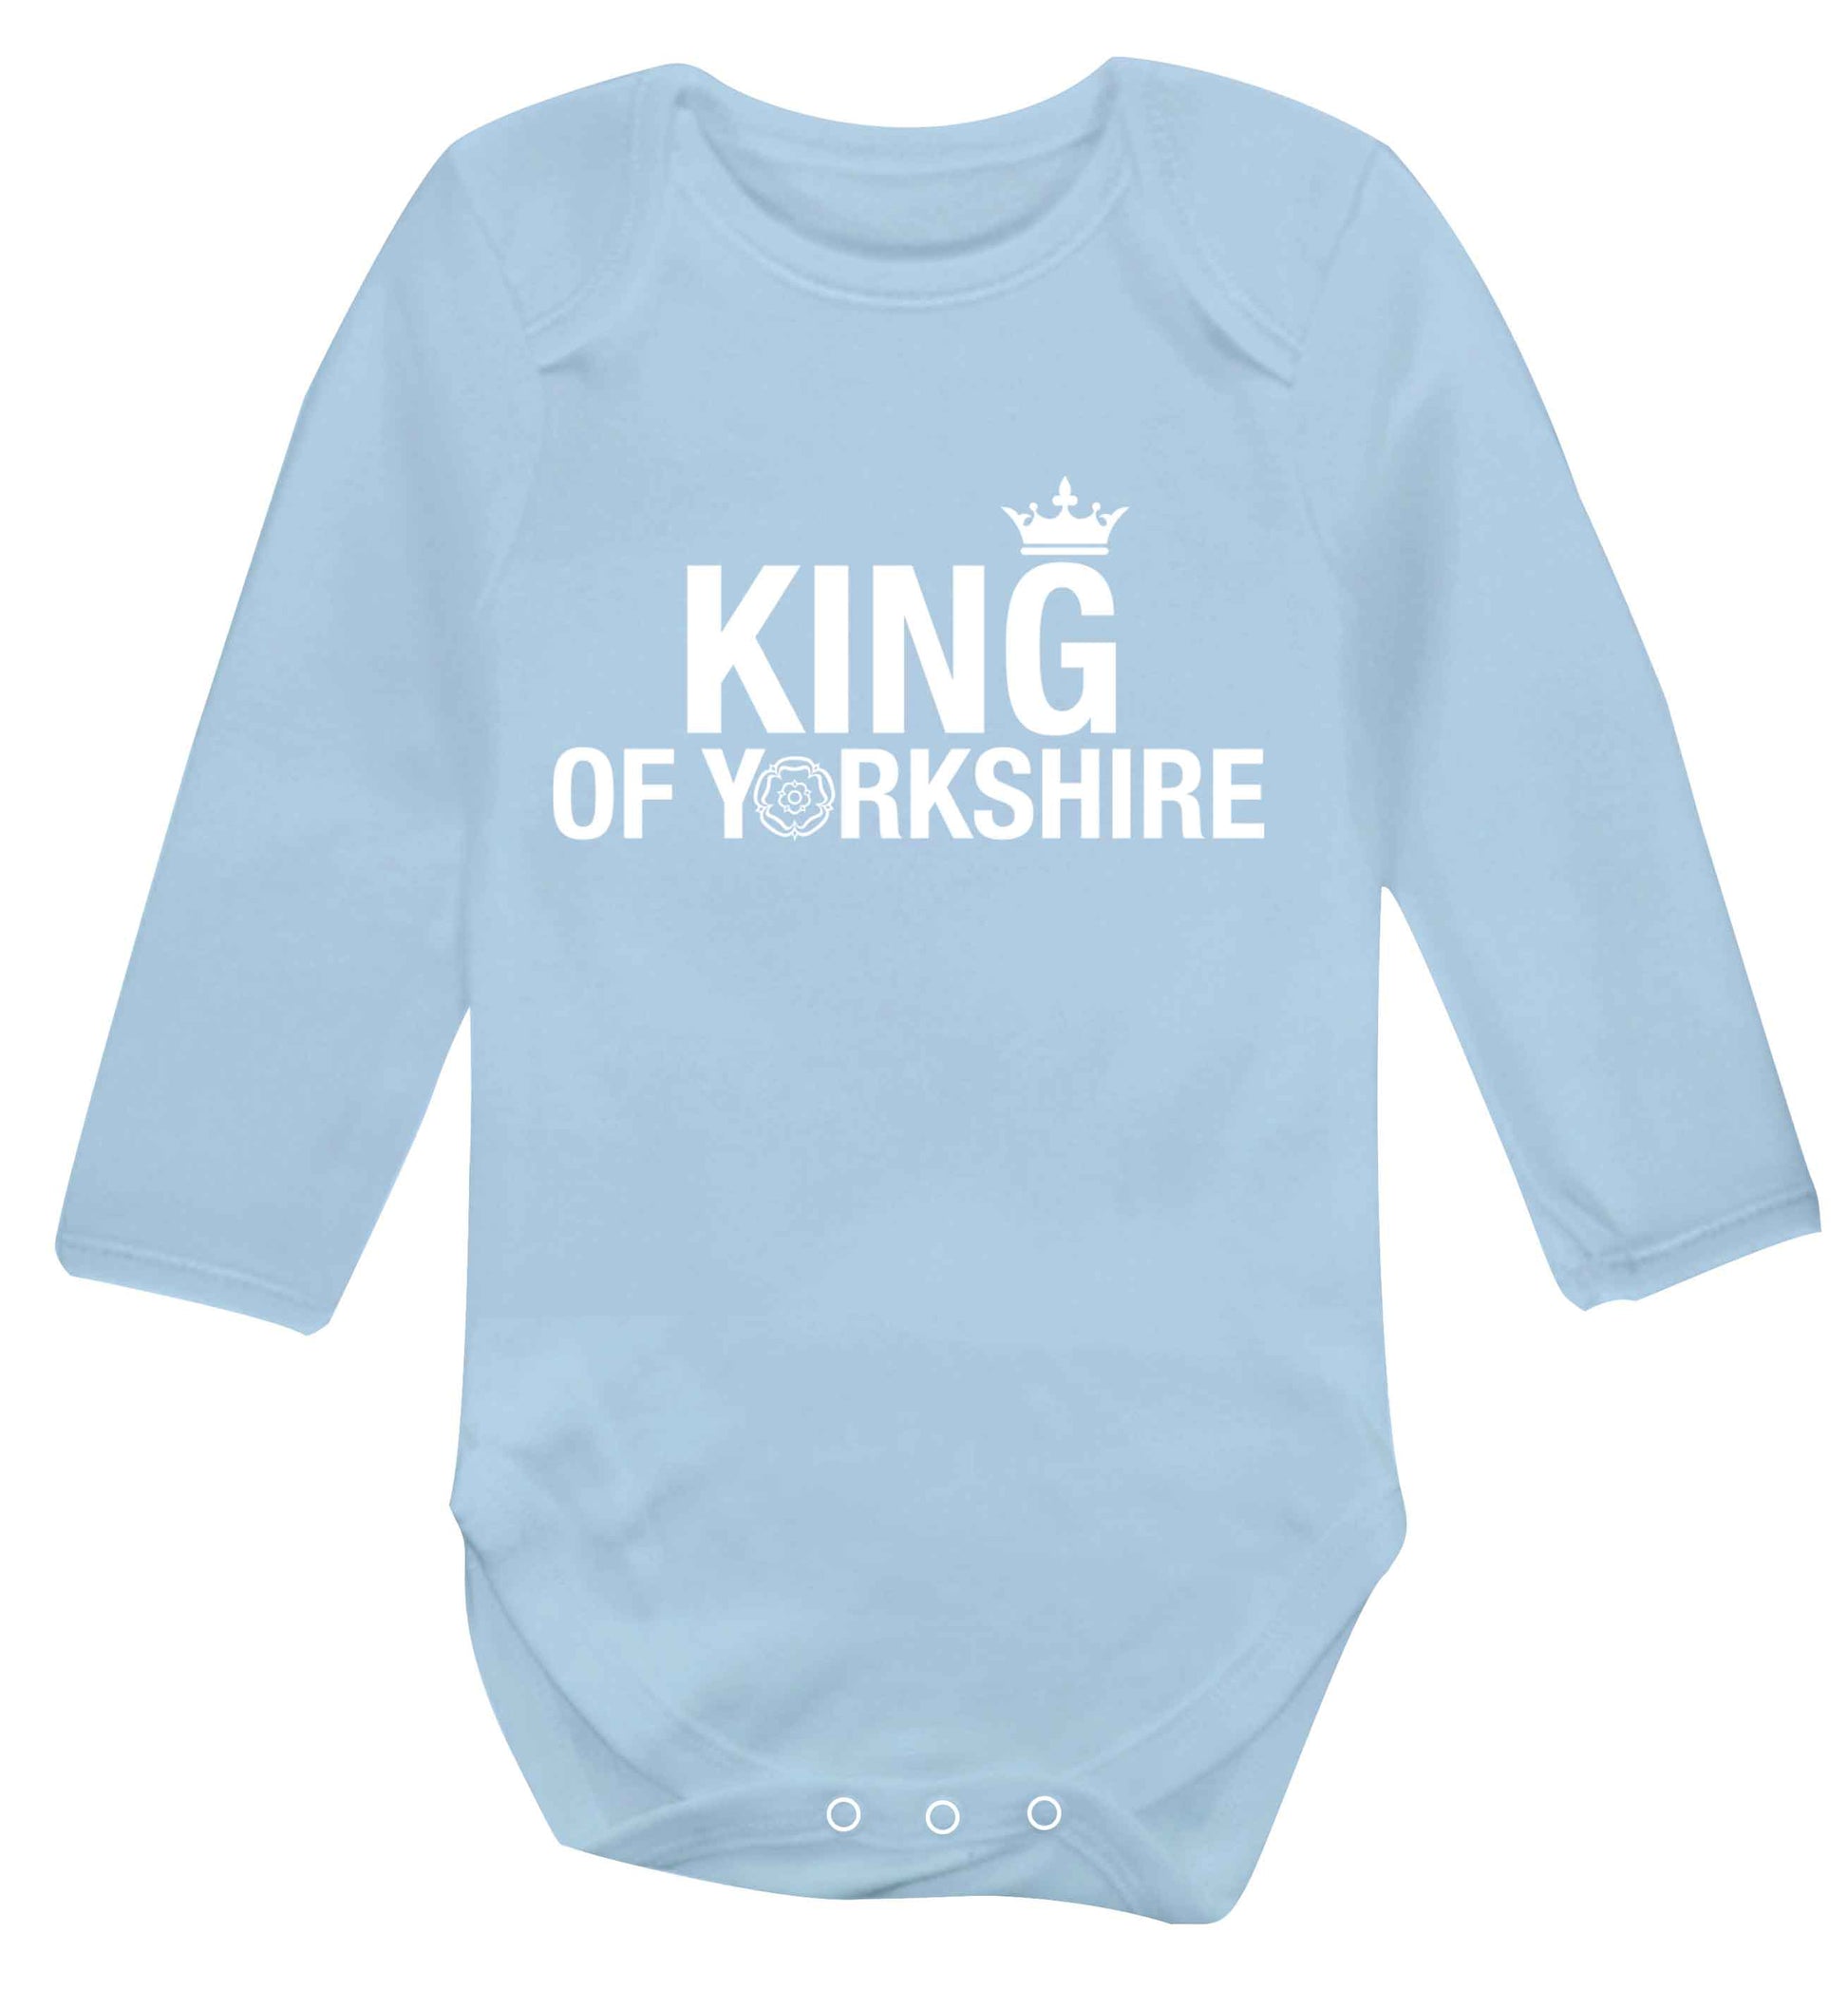 King of Yorkshire Baby Vest long sleeved pale blue 6-12 months